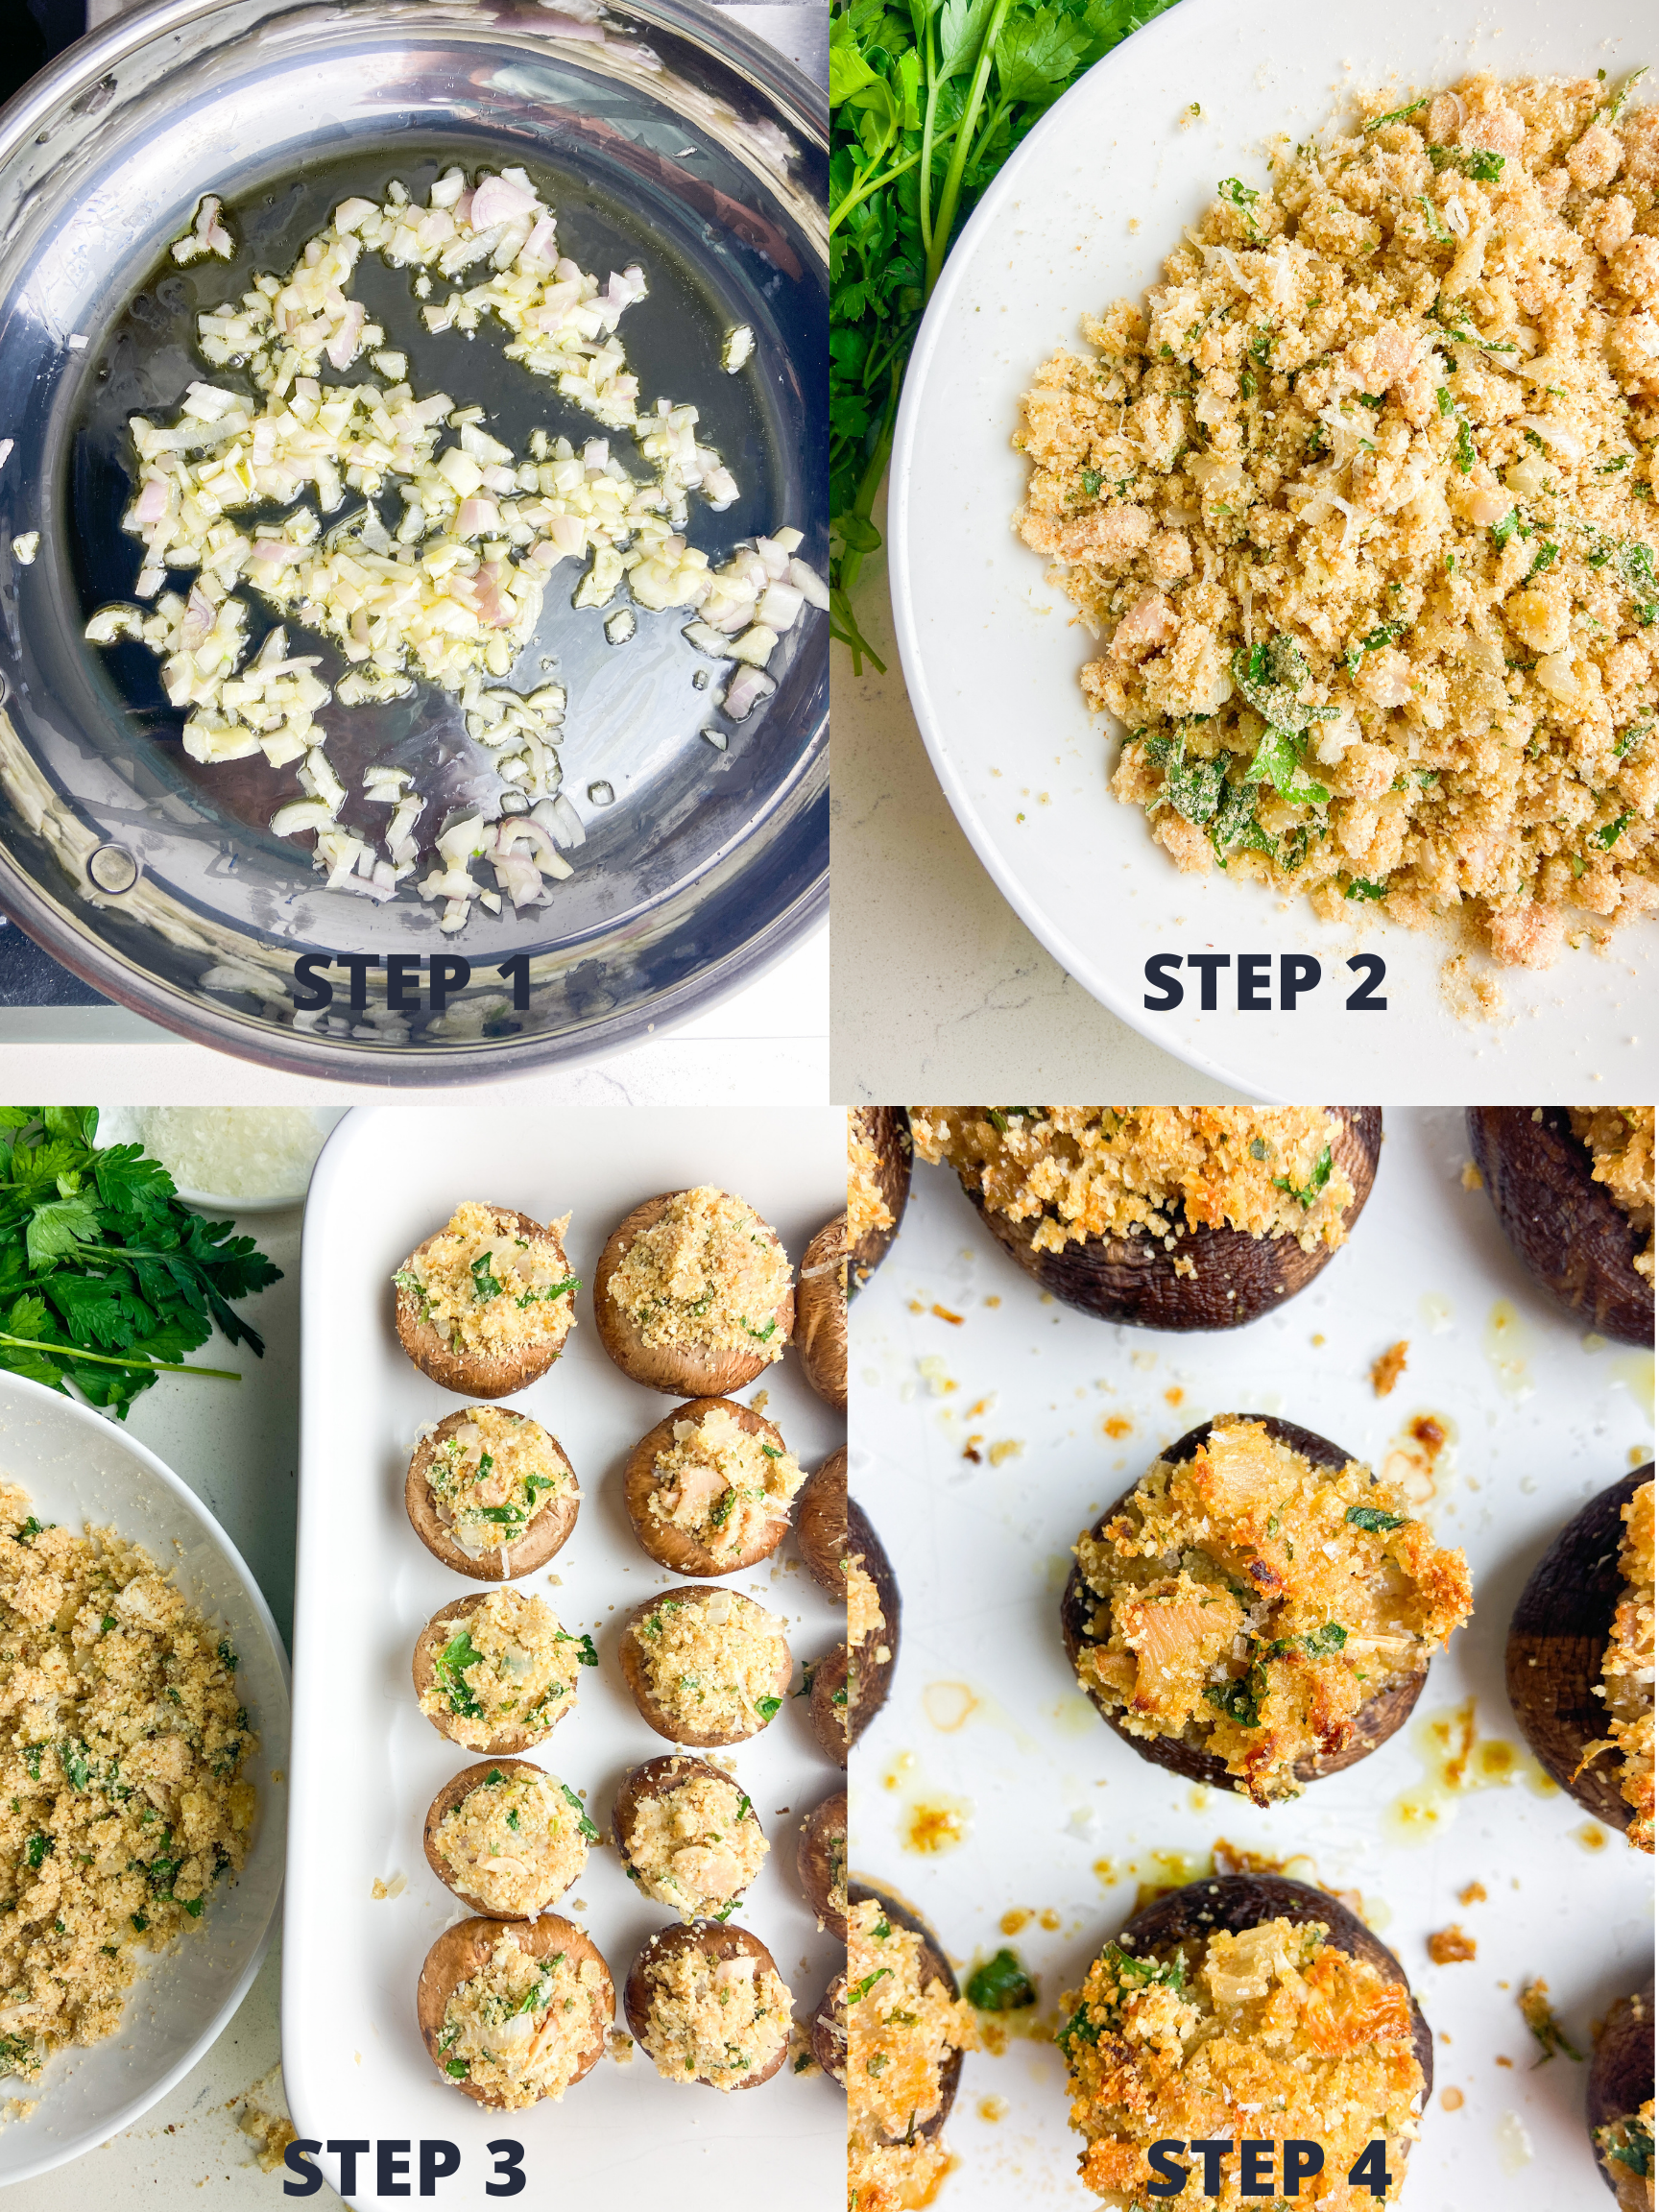 Step by step photos for making easy stuffed mushrooms